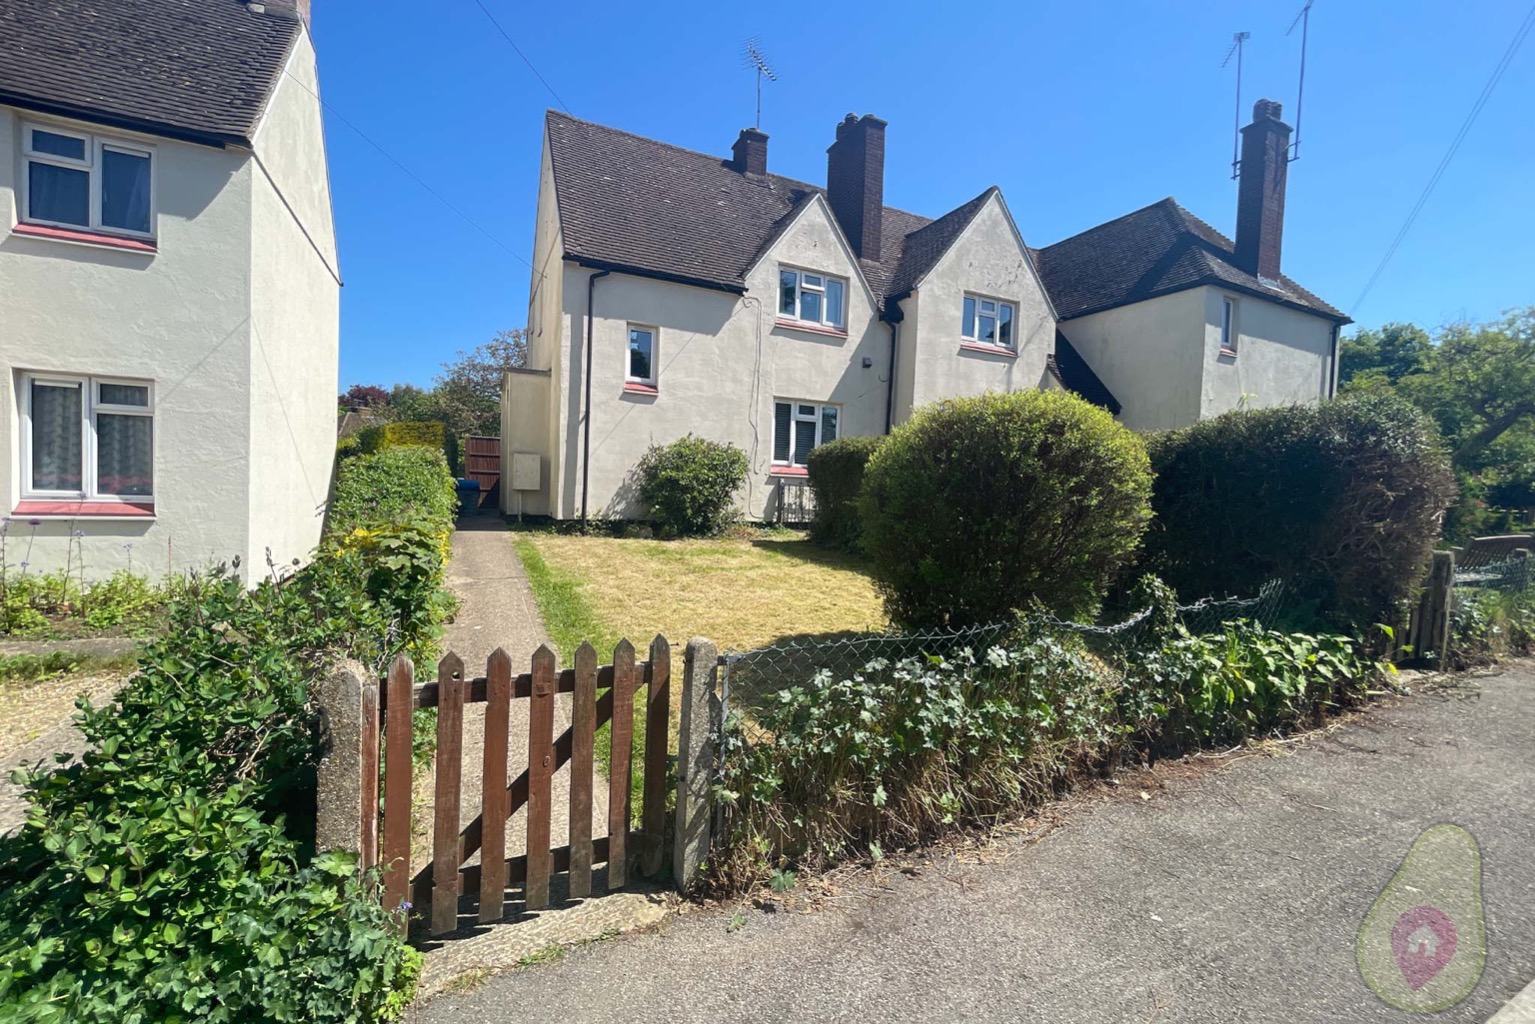 **Check out the property video** Really well presented inside, with two good sized bedrooms, a living room, kitchen and bathroom. The property features a private rear garden which is accessed by either the kitchen or a gate to the side.